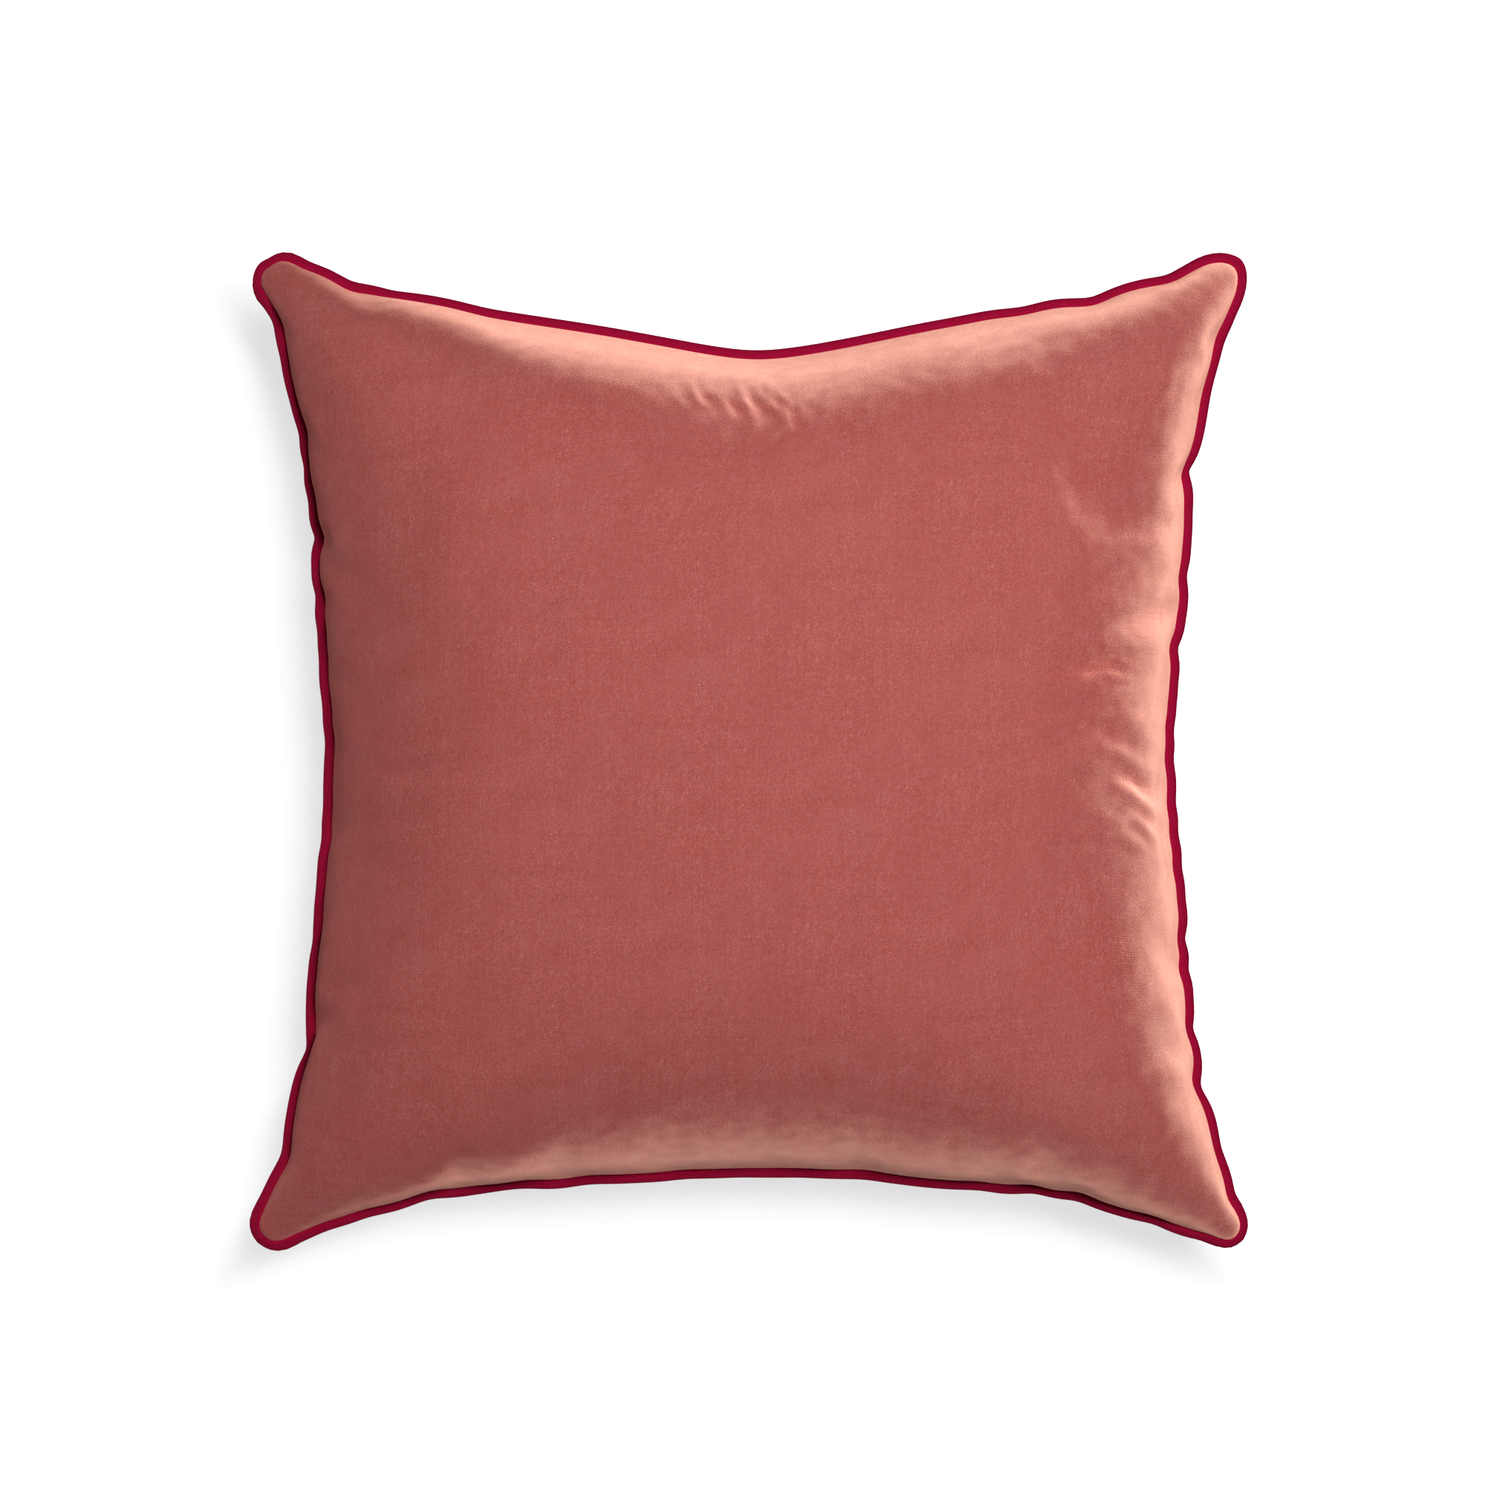 22-square cosmo velvet custom pillow with raspberry piping on white background